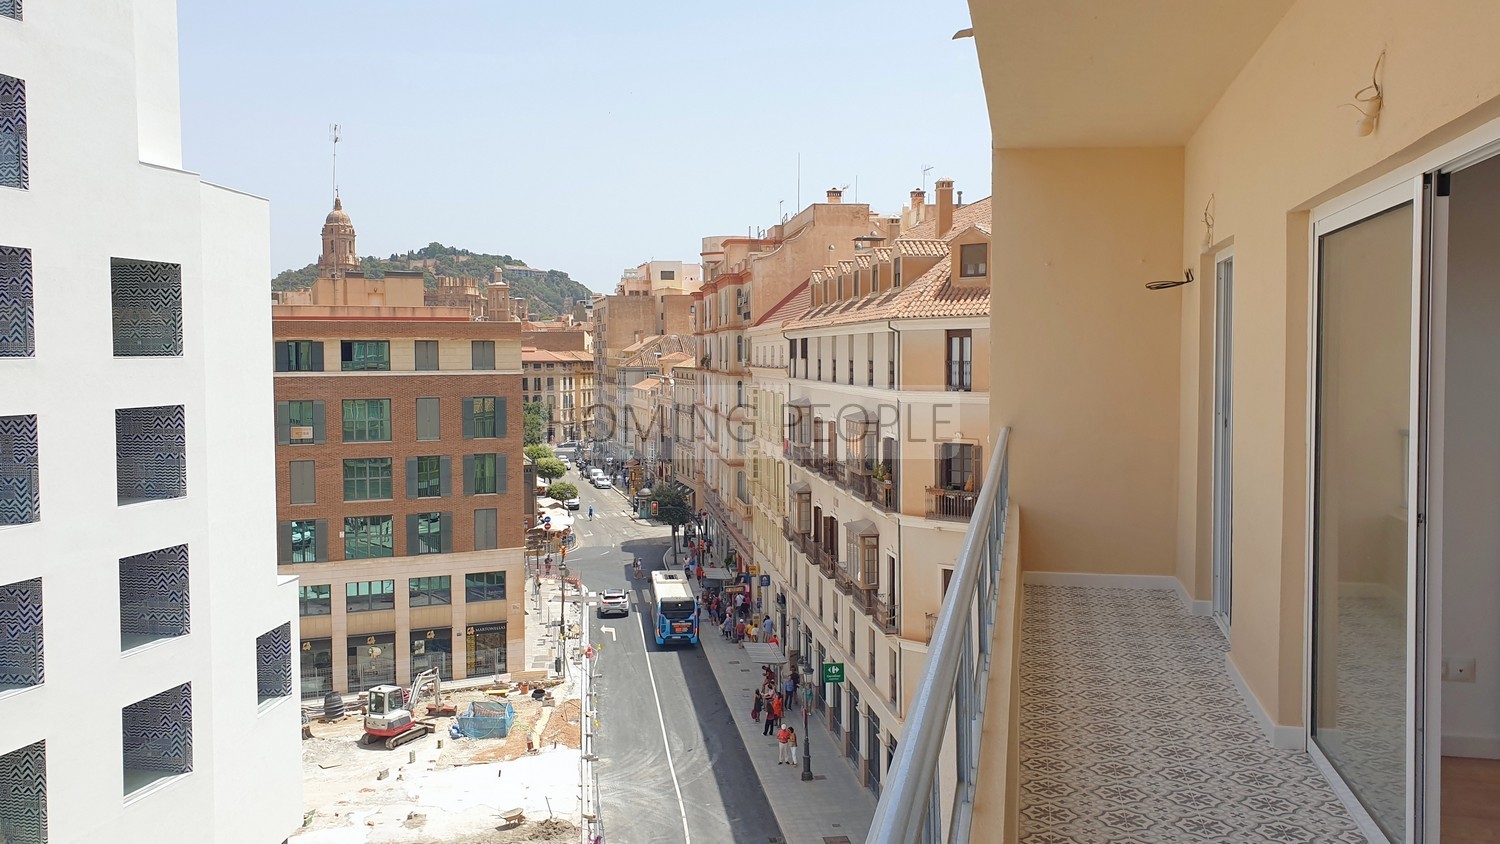 Freshly-refurbished, unfurnished flat with a terrace, located close to the main market!